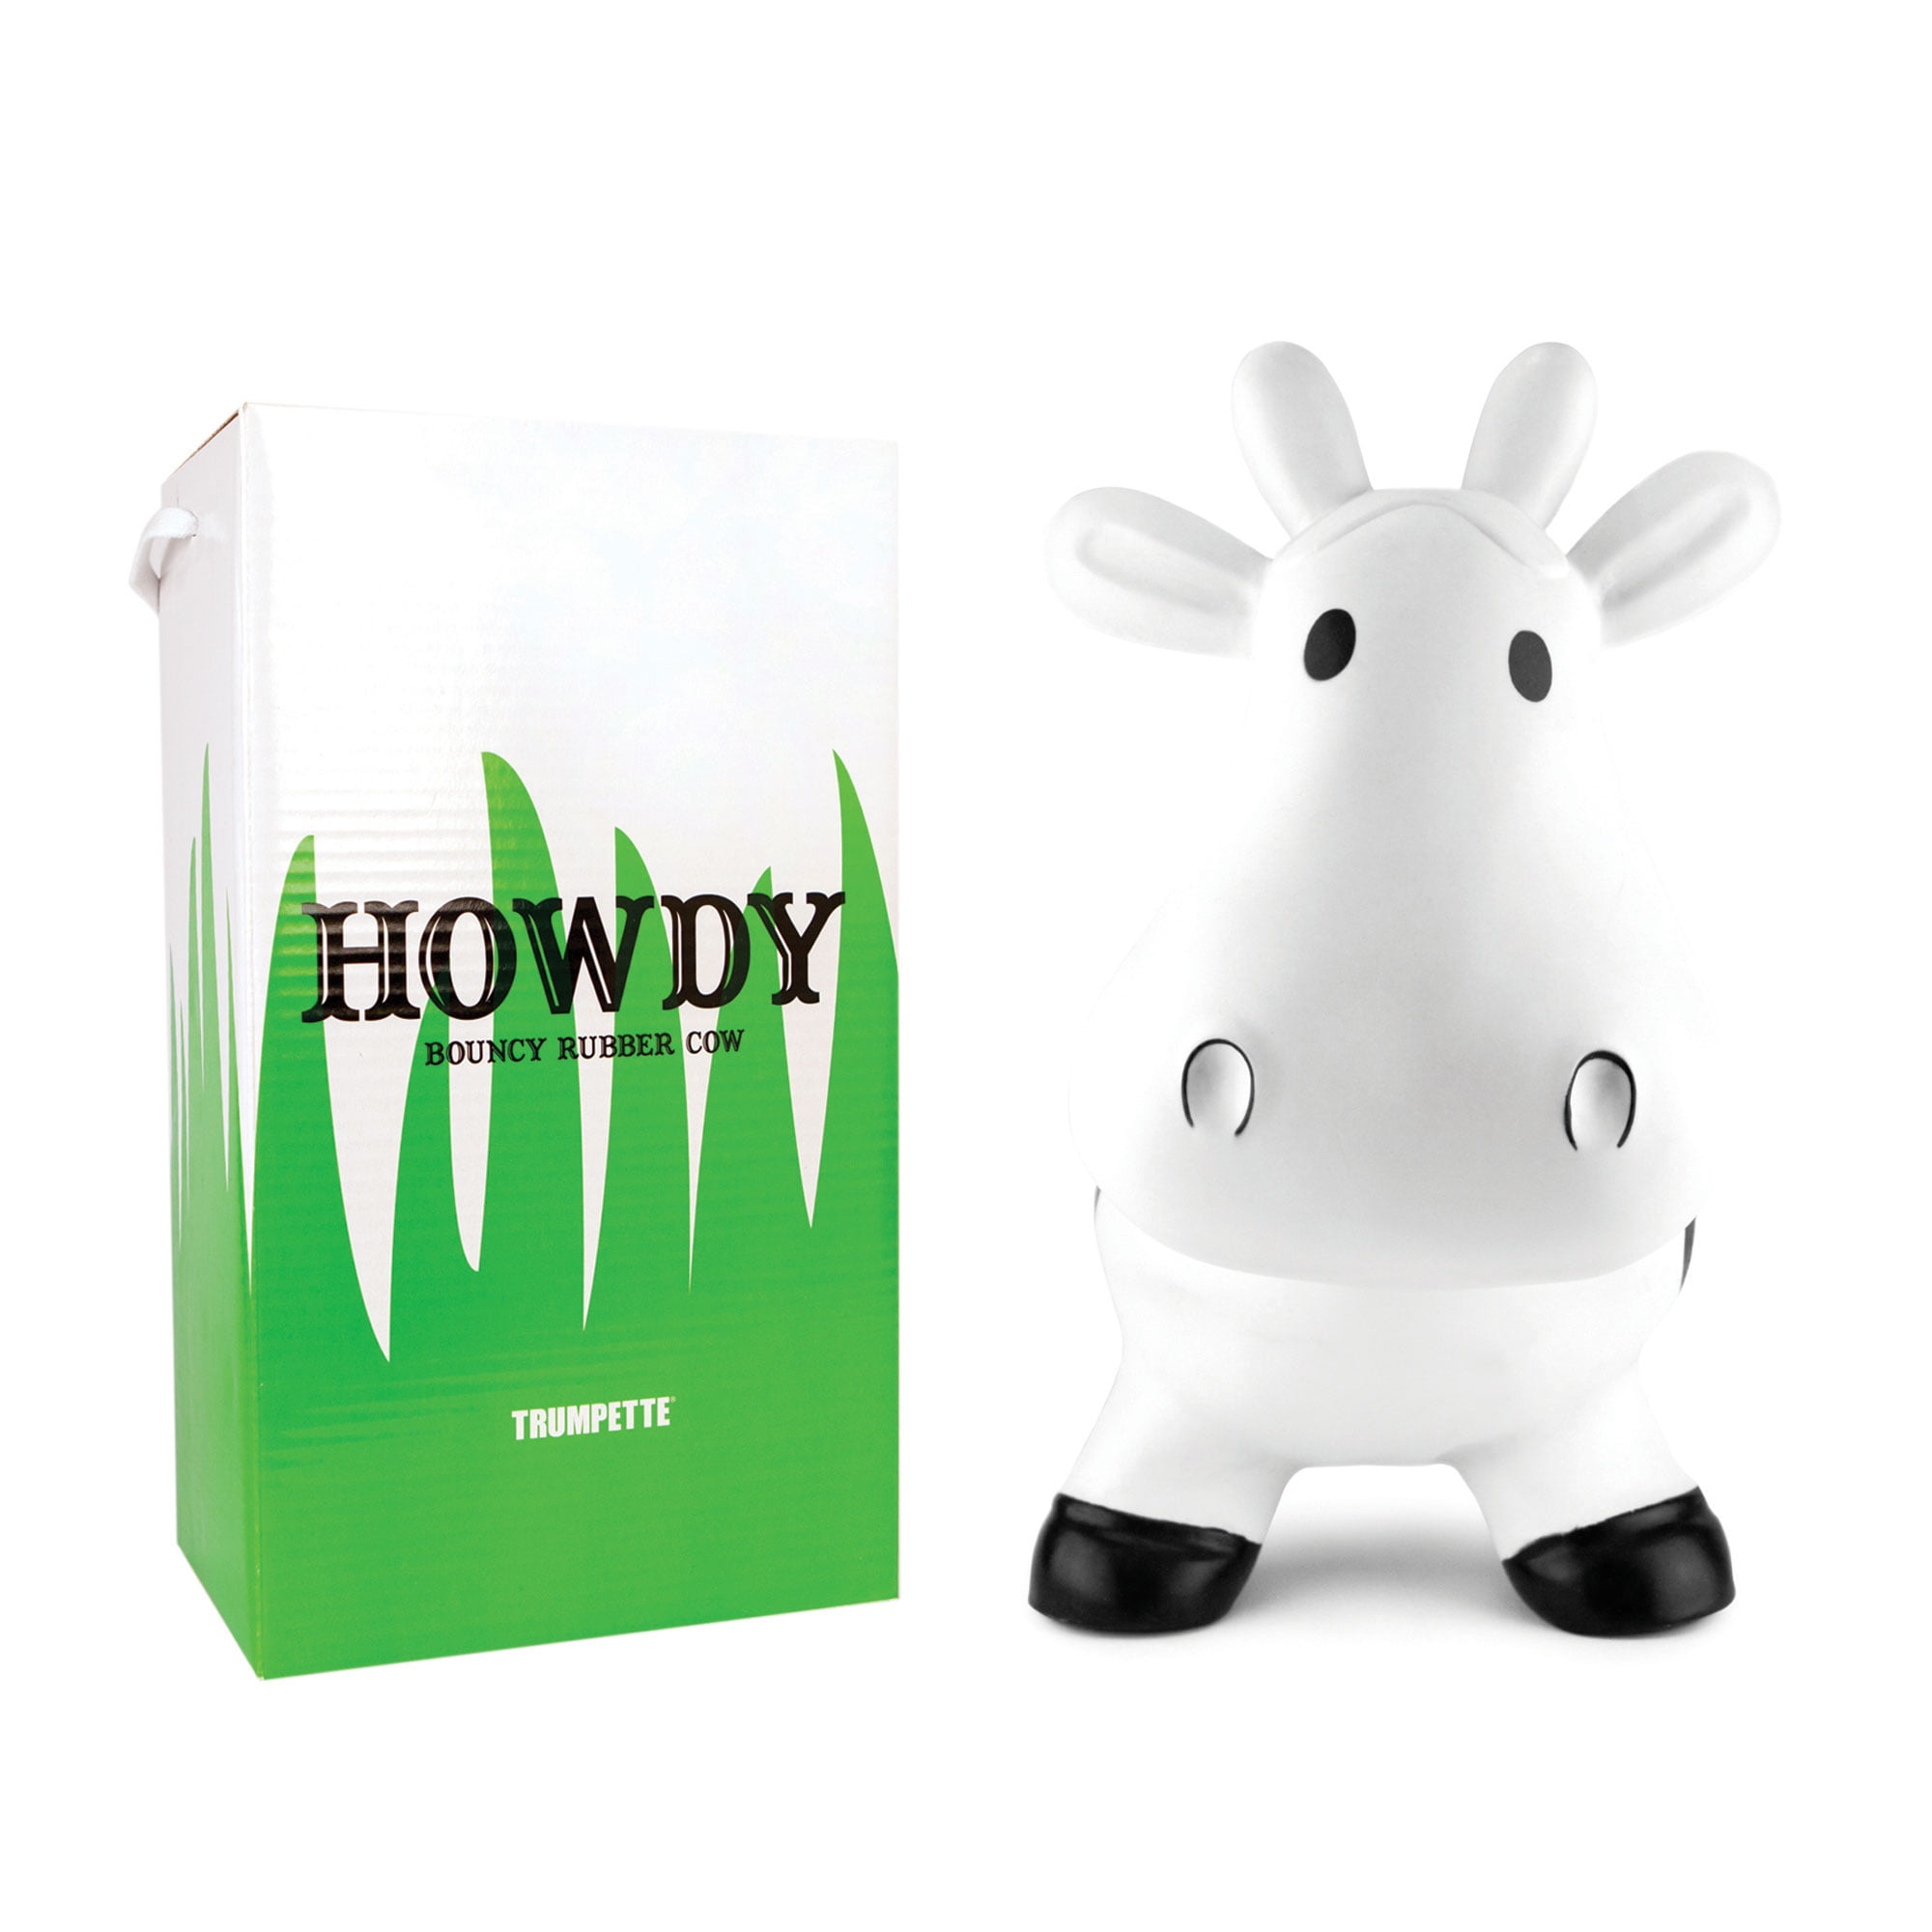 Trumpette Howdy Cow Original Inflatable Bouncy Rubber Hopper Ride-On Toy  For Kids Eco-Friendly Physical Therapy Bouncer Seat to Help Increase  Balance and Agility with Hand Pump; Best Kid Gift! White - Walmart.com